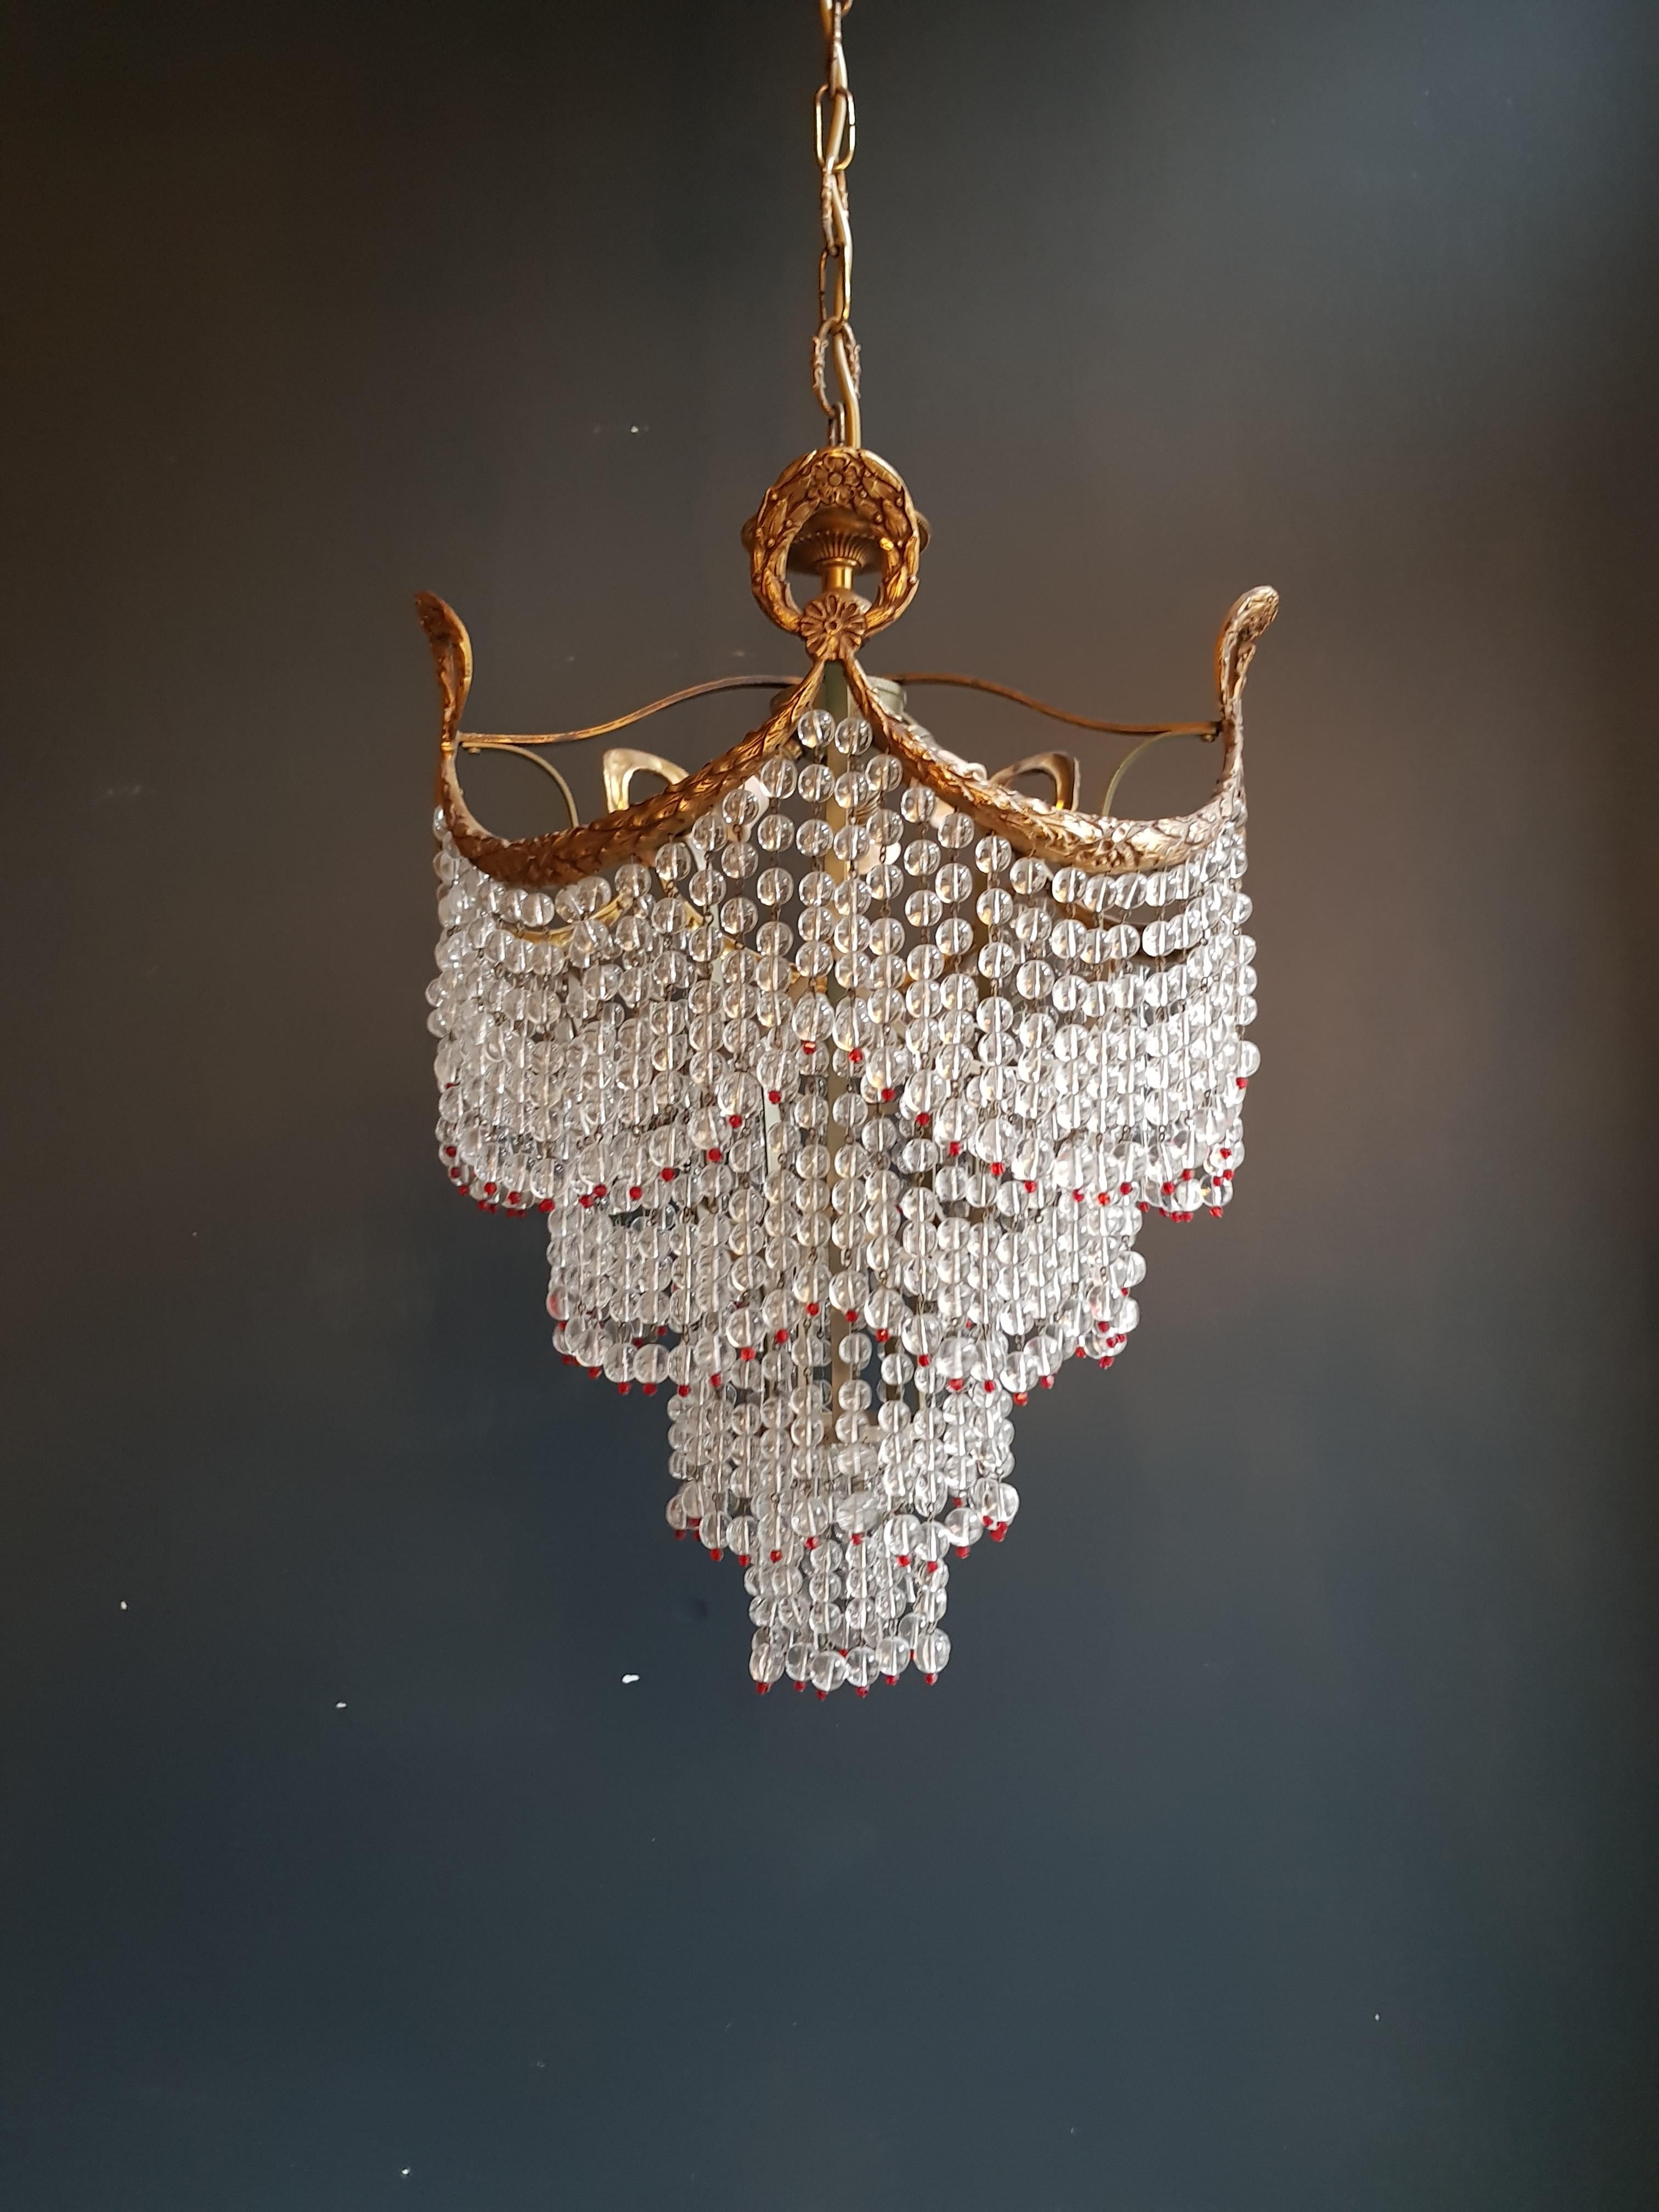 Beaded waterfall crystal chandelier antique ceiling lamp lustre Art Nouveau
beaded chains where lovely smooth and icicle cut crystals drops are hanging. 

Measures: Total height 150 cm, height without chain 50 cm, diameter 35 cm. Weight